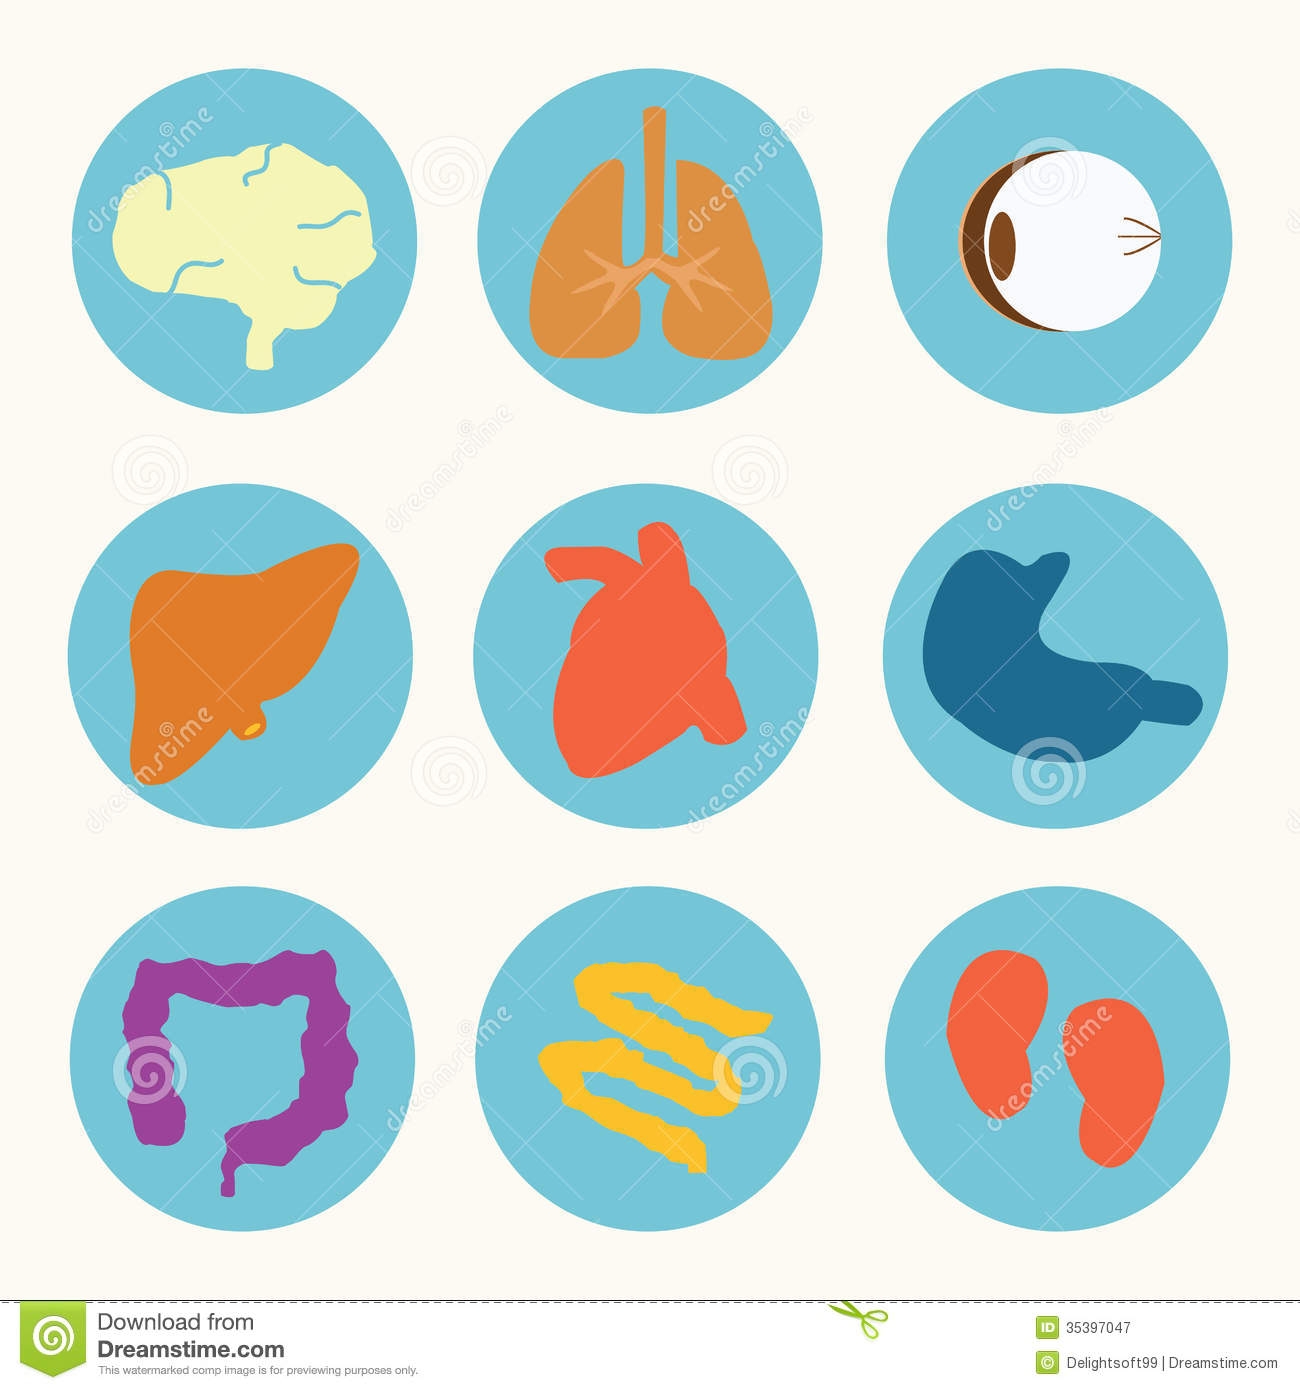 Body clipart organ, Body organ Transparent FREE for download